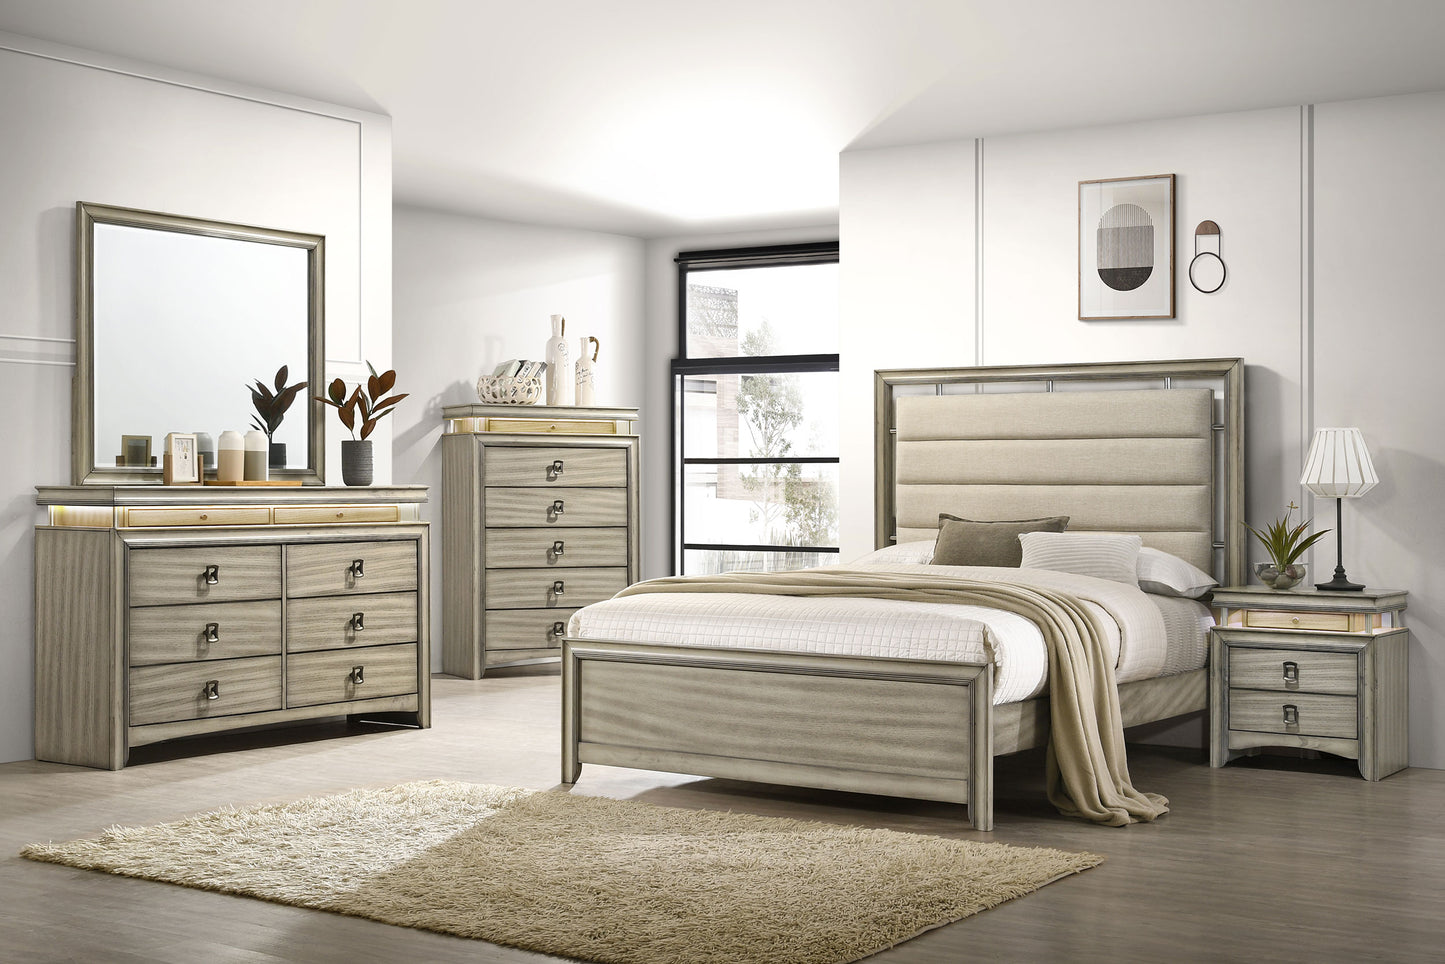 Giselle Wood California King Panel Bed Rustic Beige